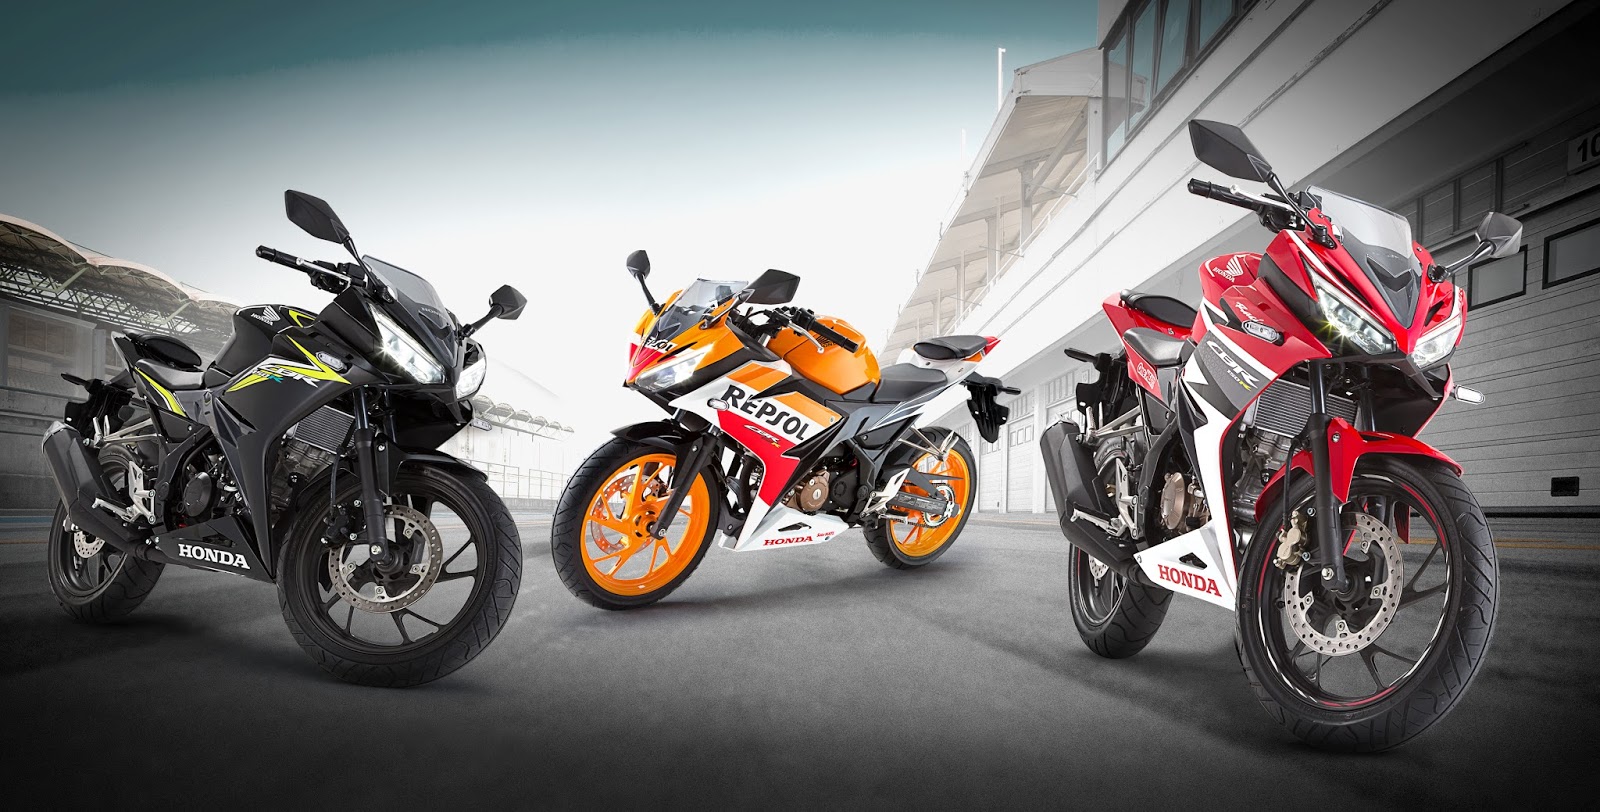 Adae To Remember: Honda Philippines:Launches all-new Honda CBR150R